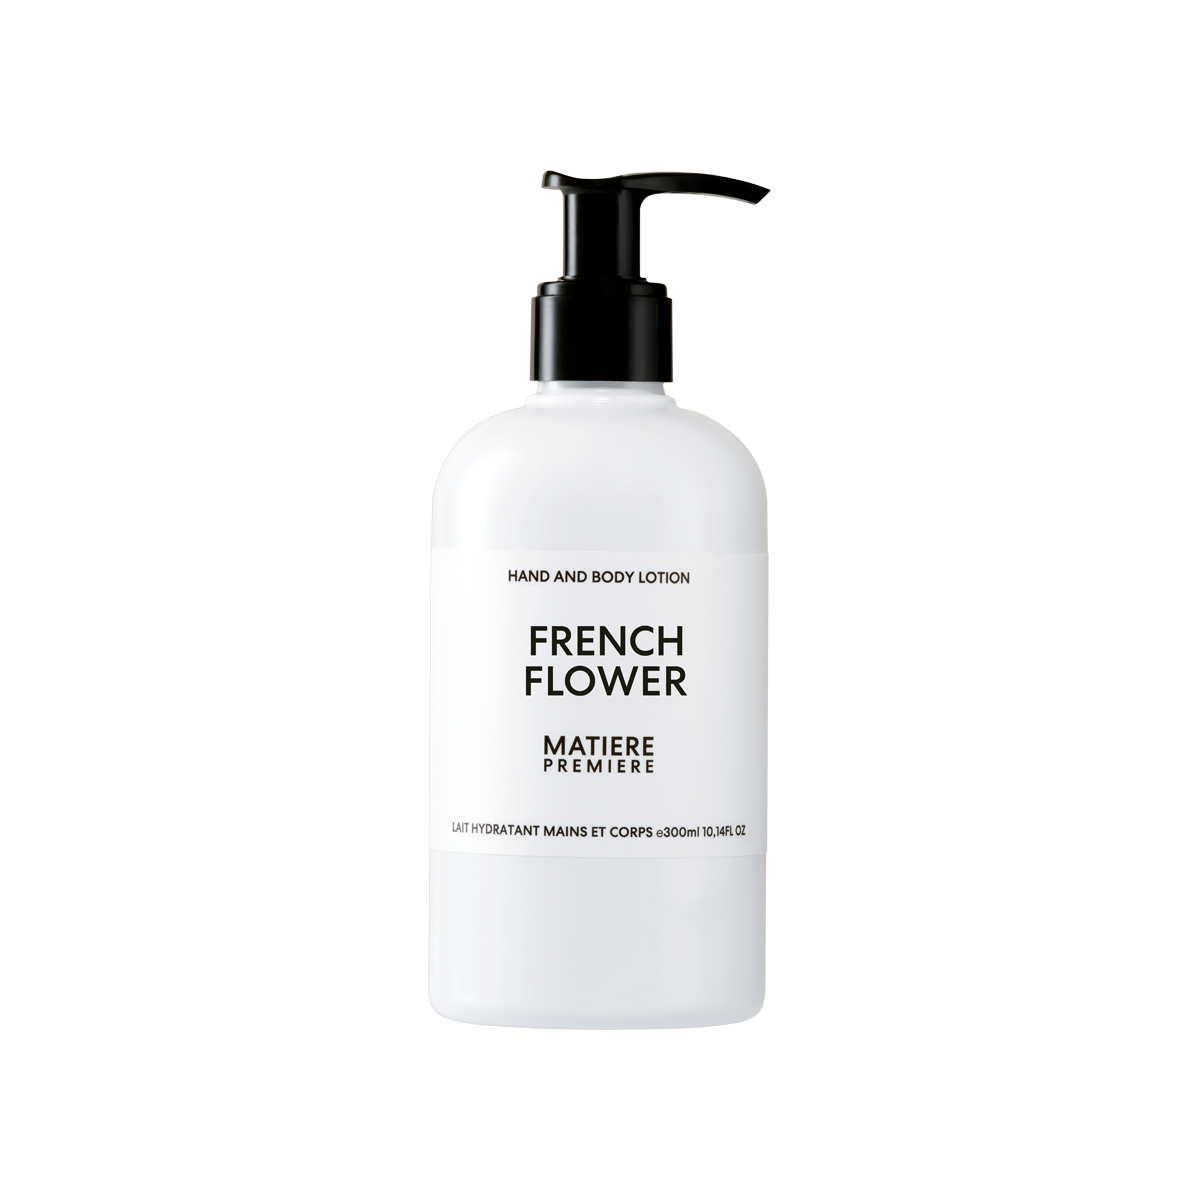 Matiere Premiere - Hand and body lotion French Flower